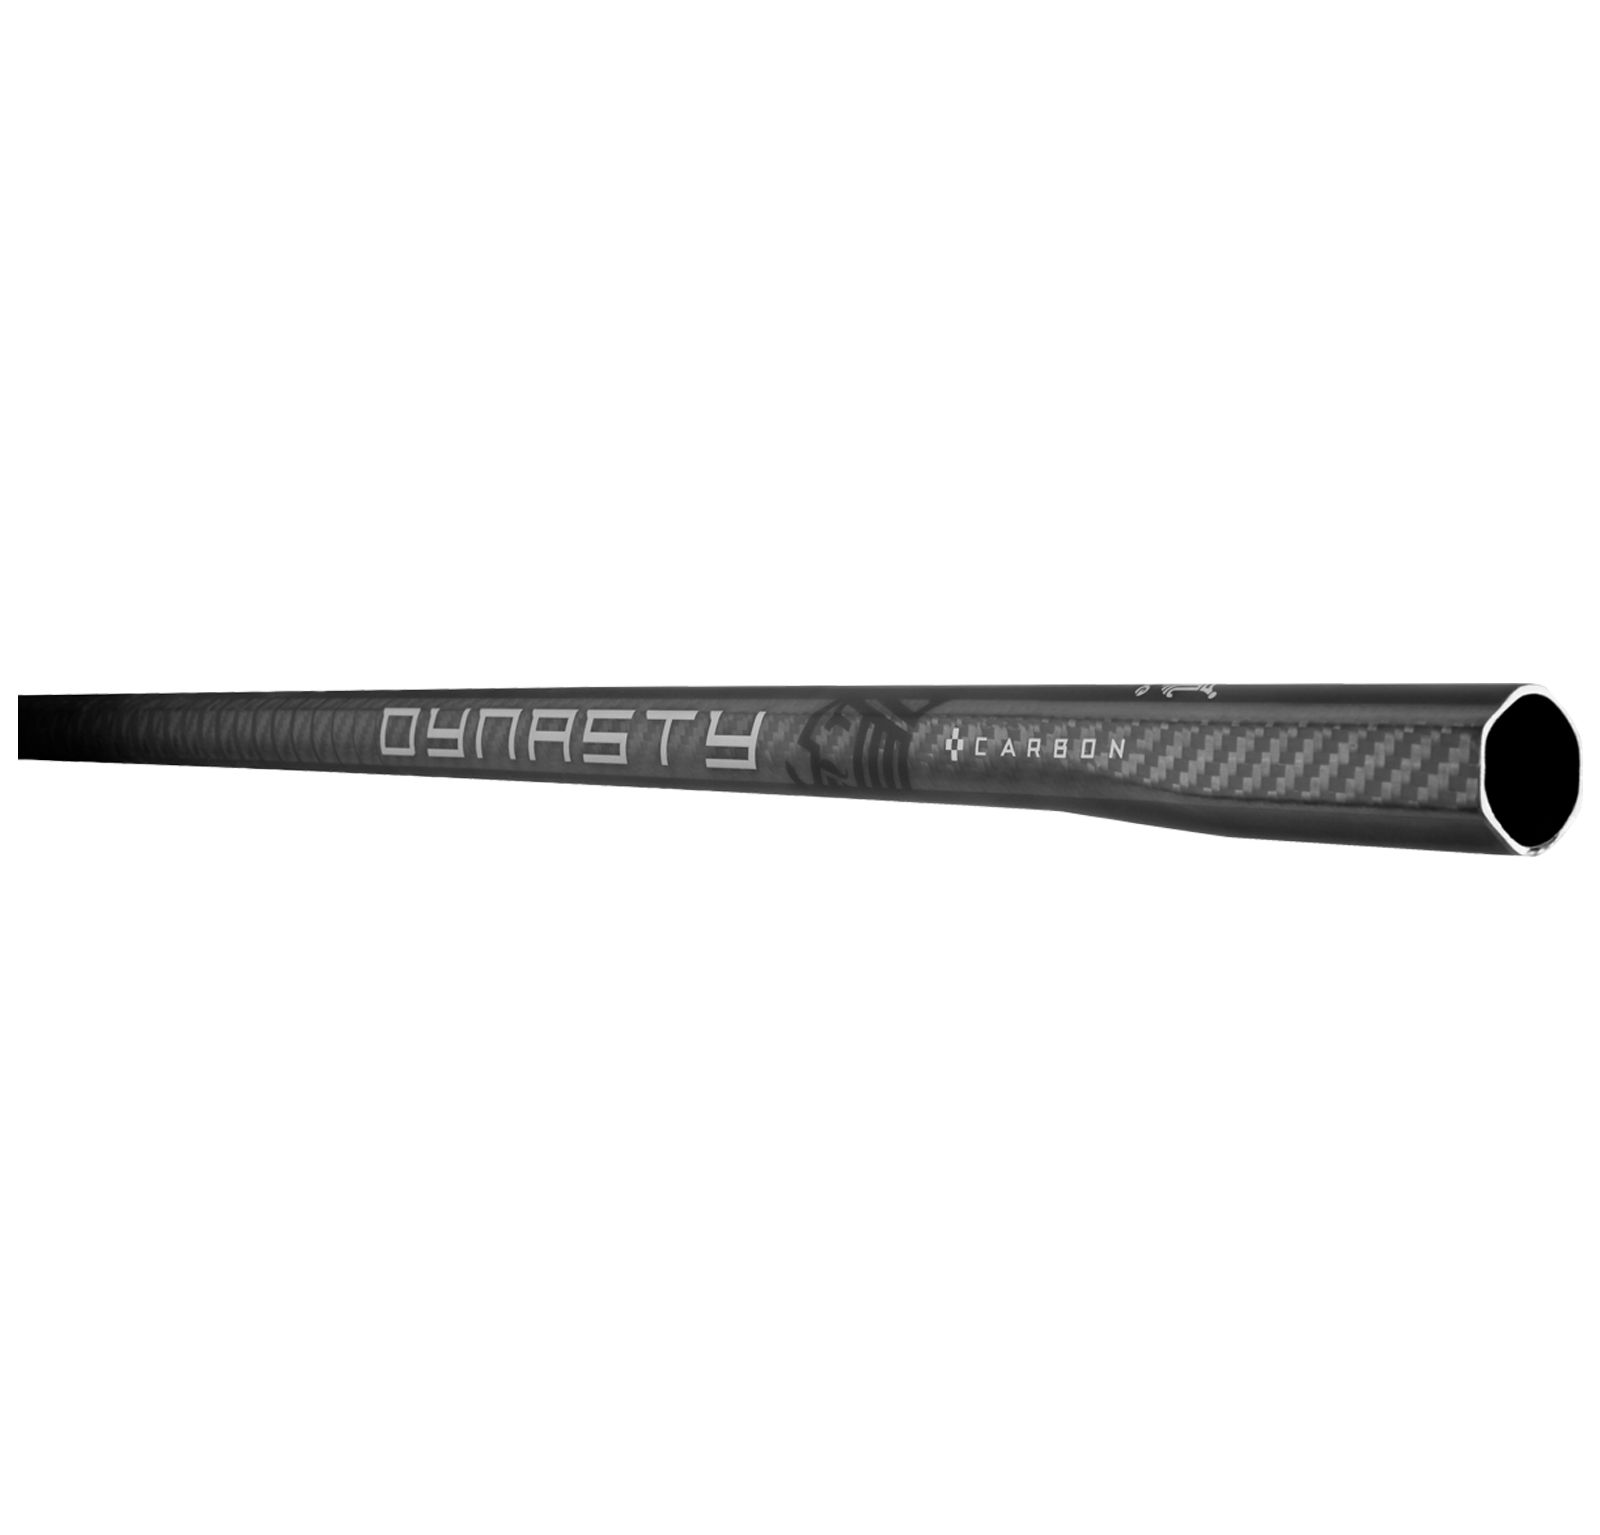 Dynasty Carbon Handle, Grey with Light Grey image number 2